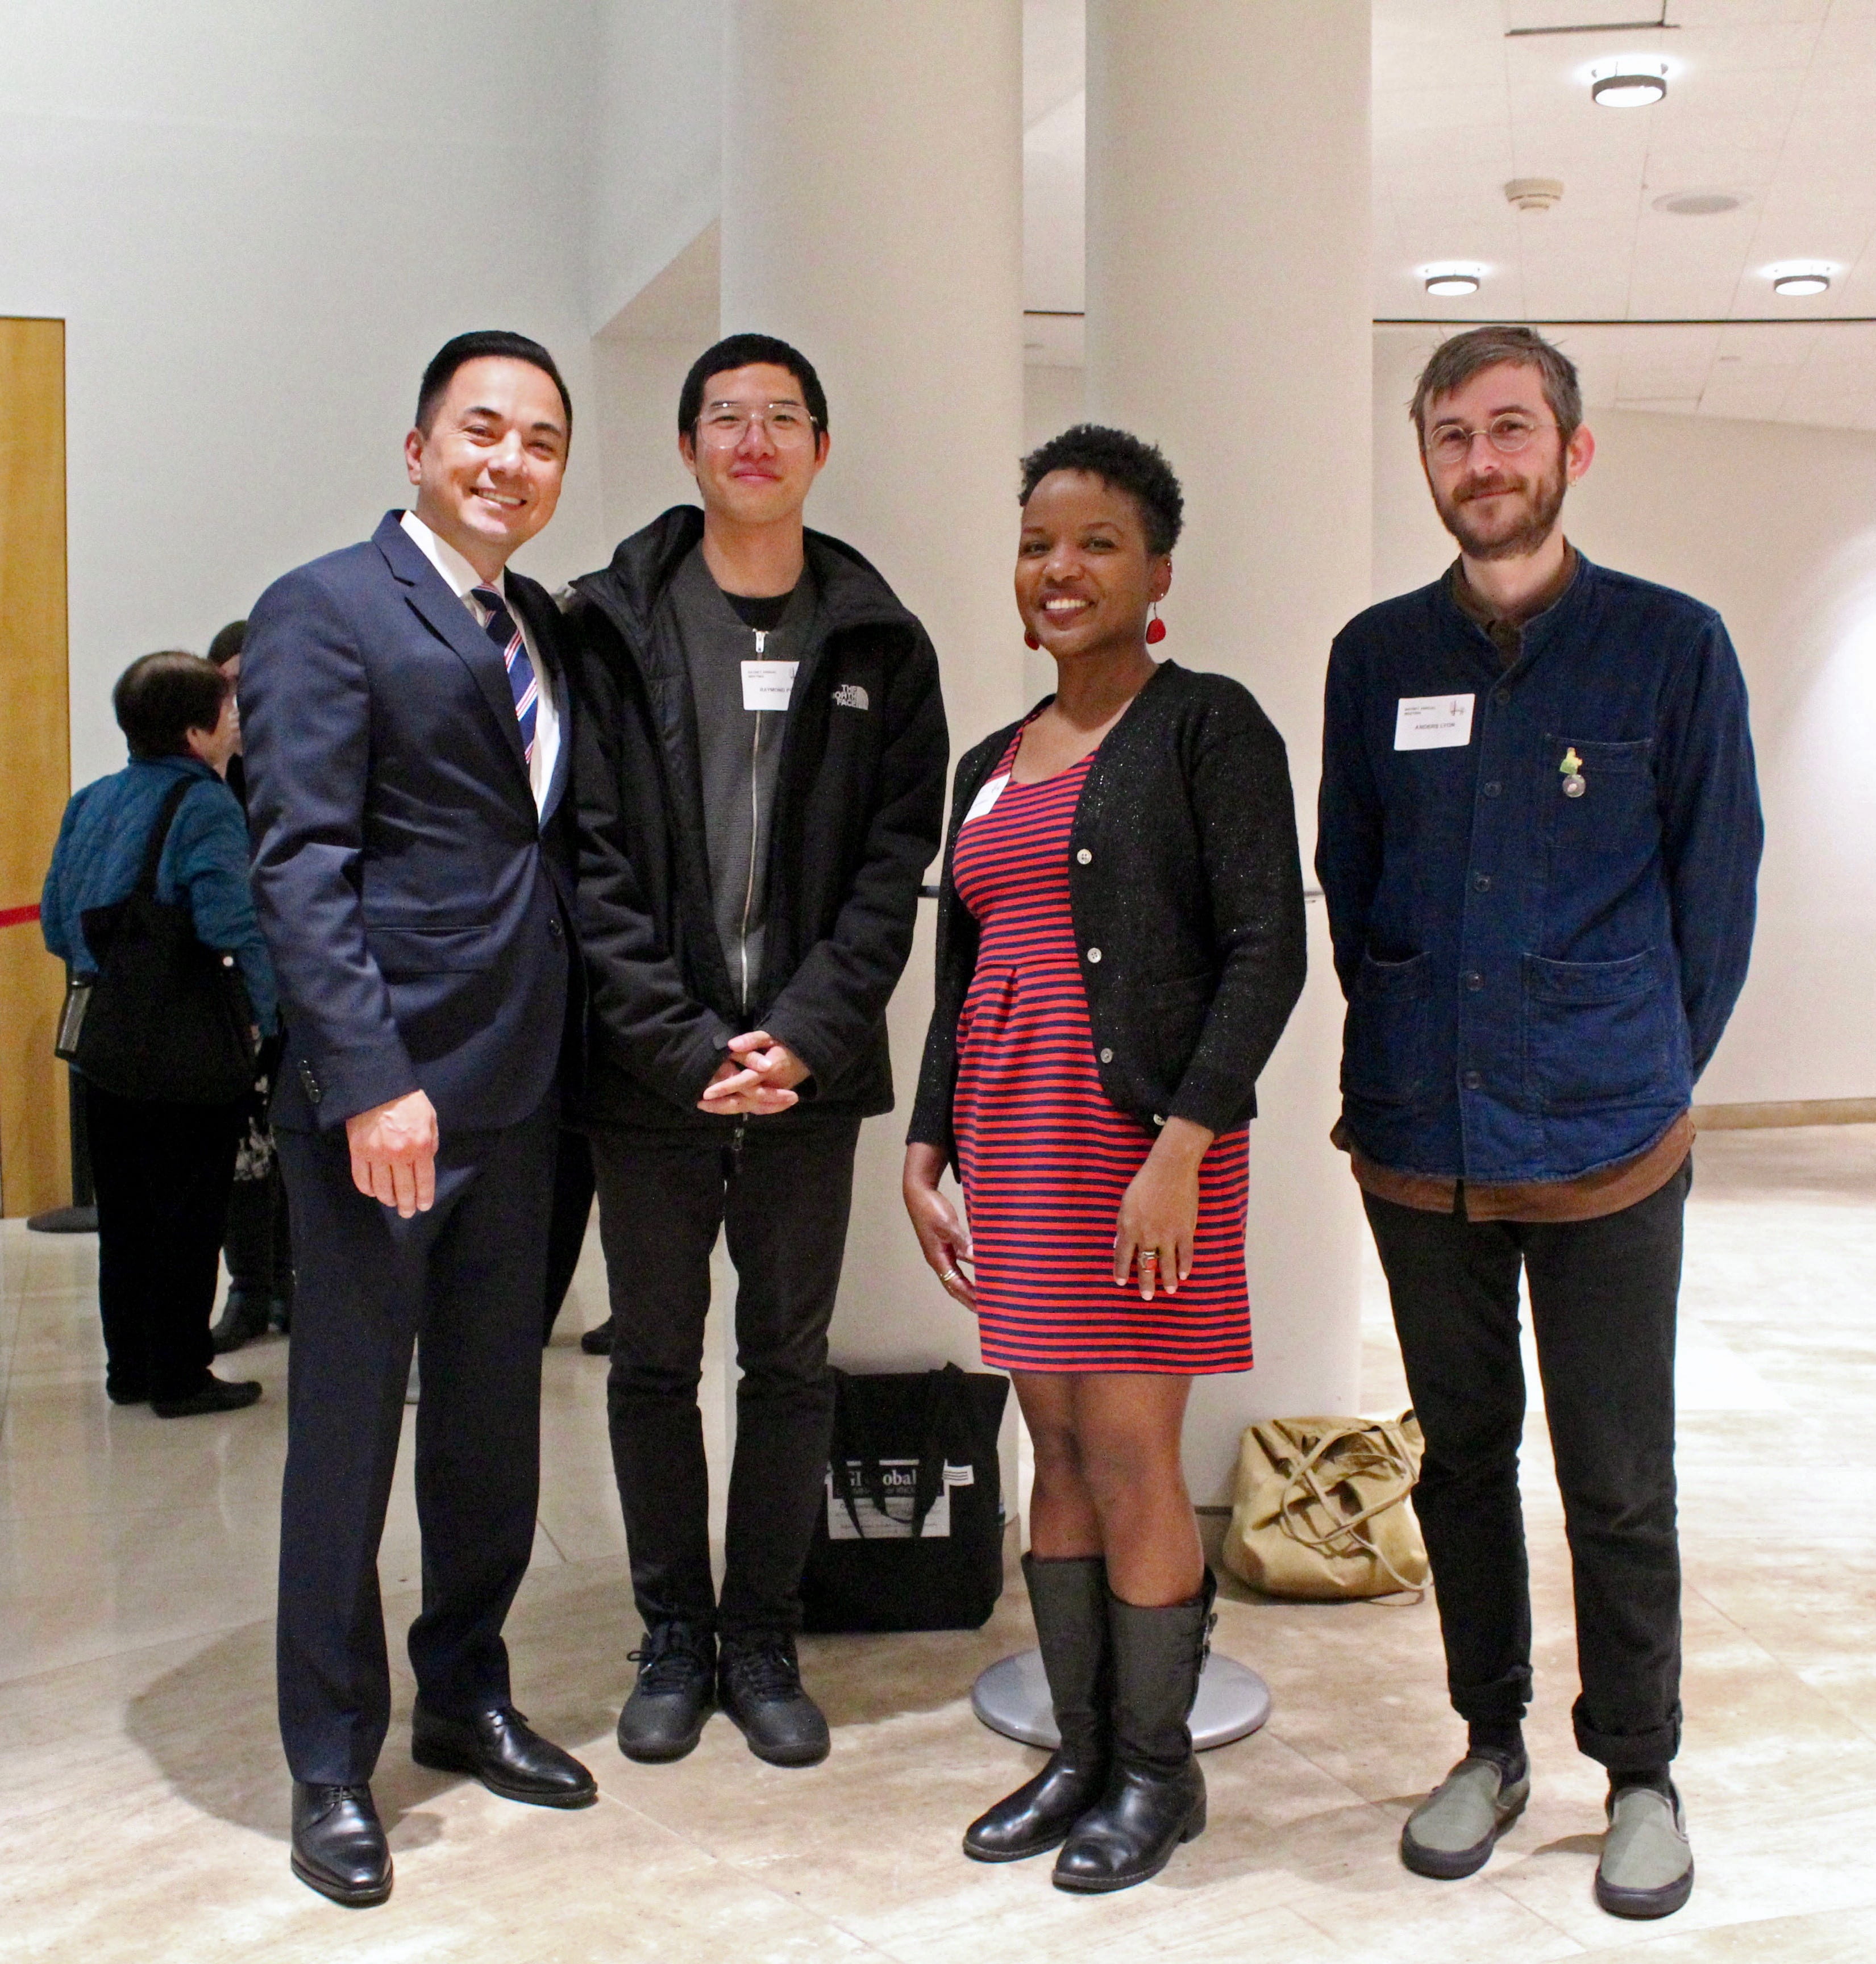 Image from left to right of Michael Lambert, Raymund Pun, Gina Murrell, and Anders Lyon at the Collective Mindset of our Future: BayNet Annual Event at the San Francisco Public Library on May 17, 2019